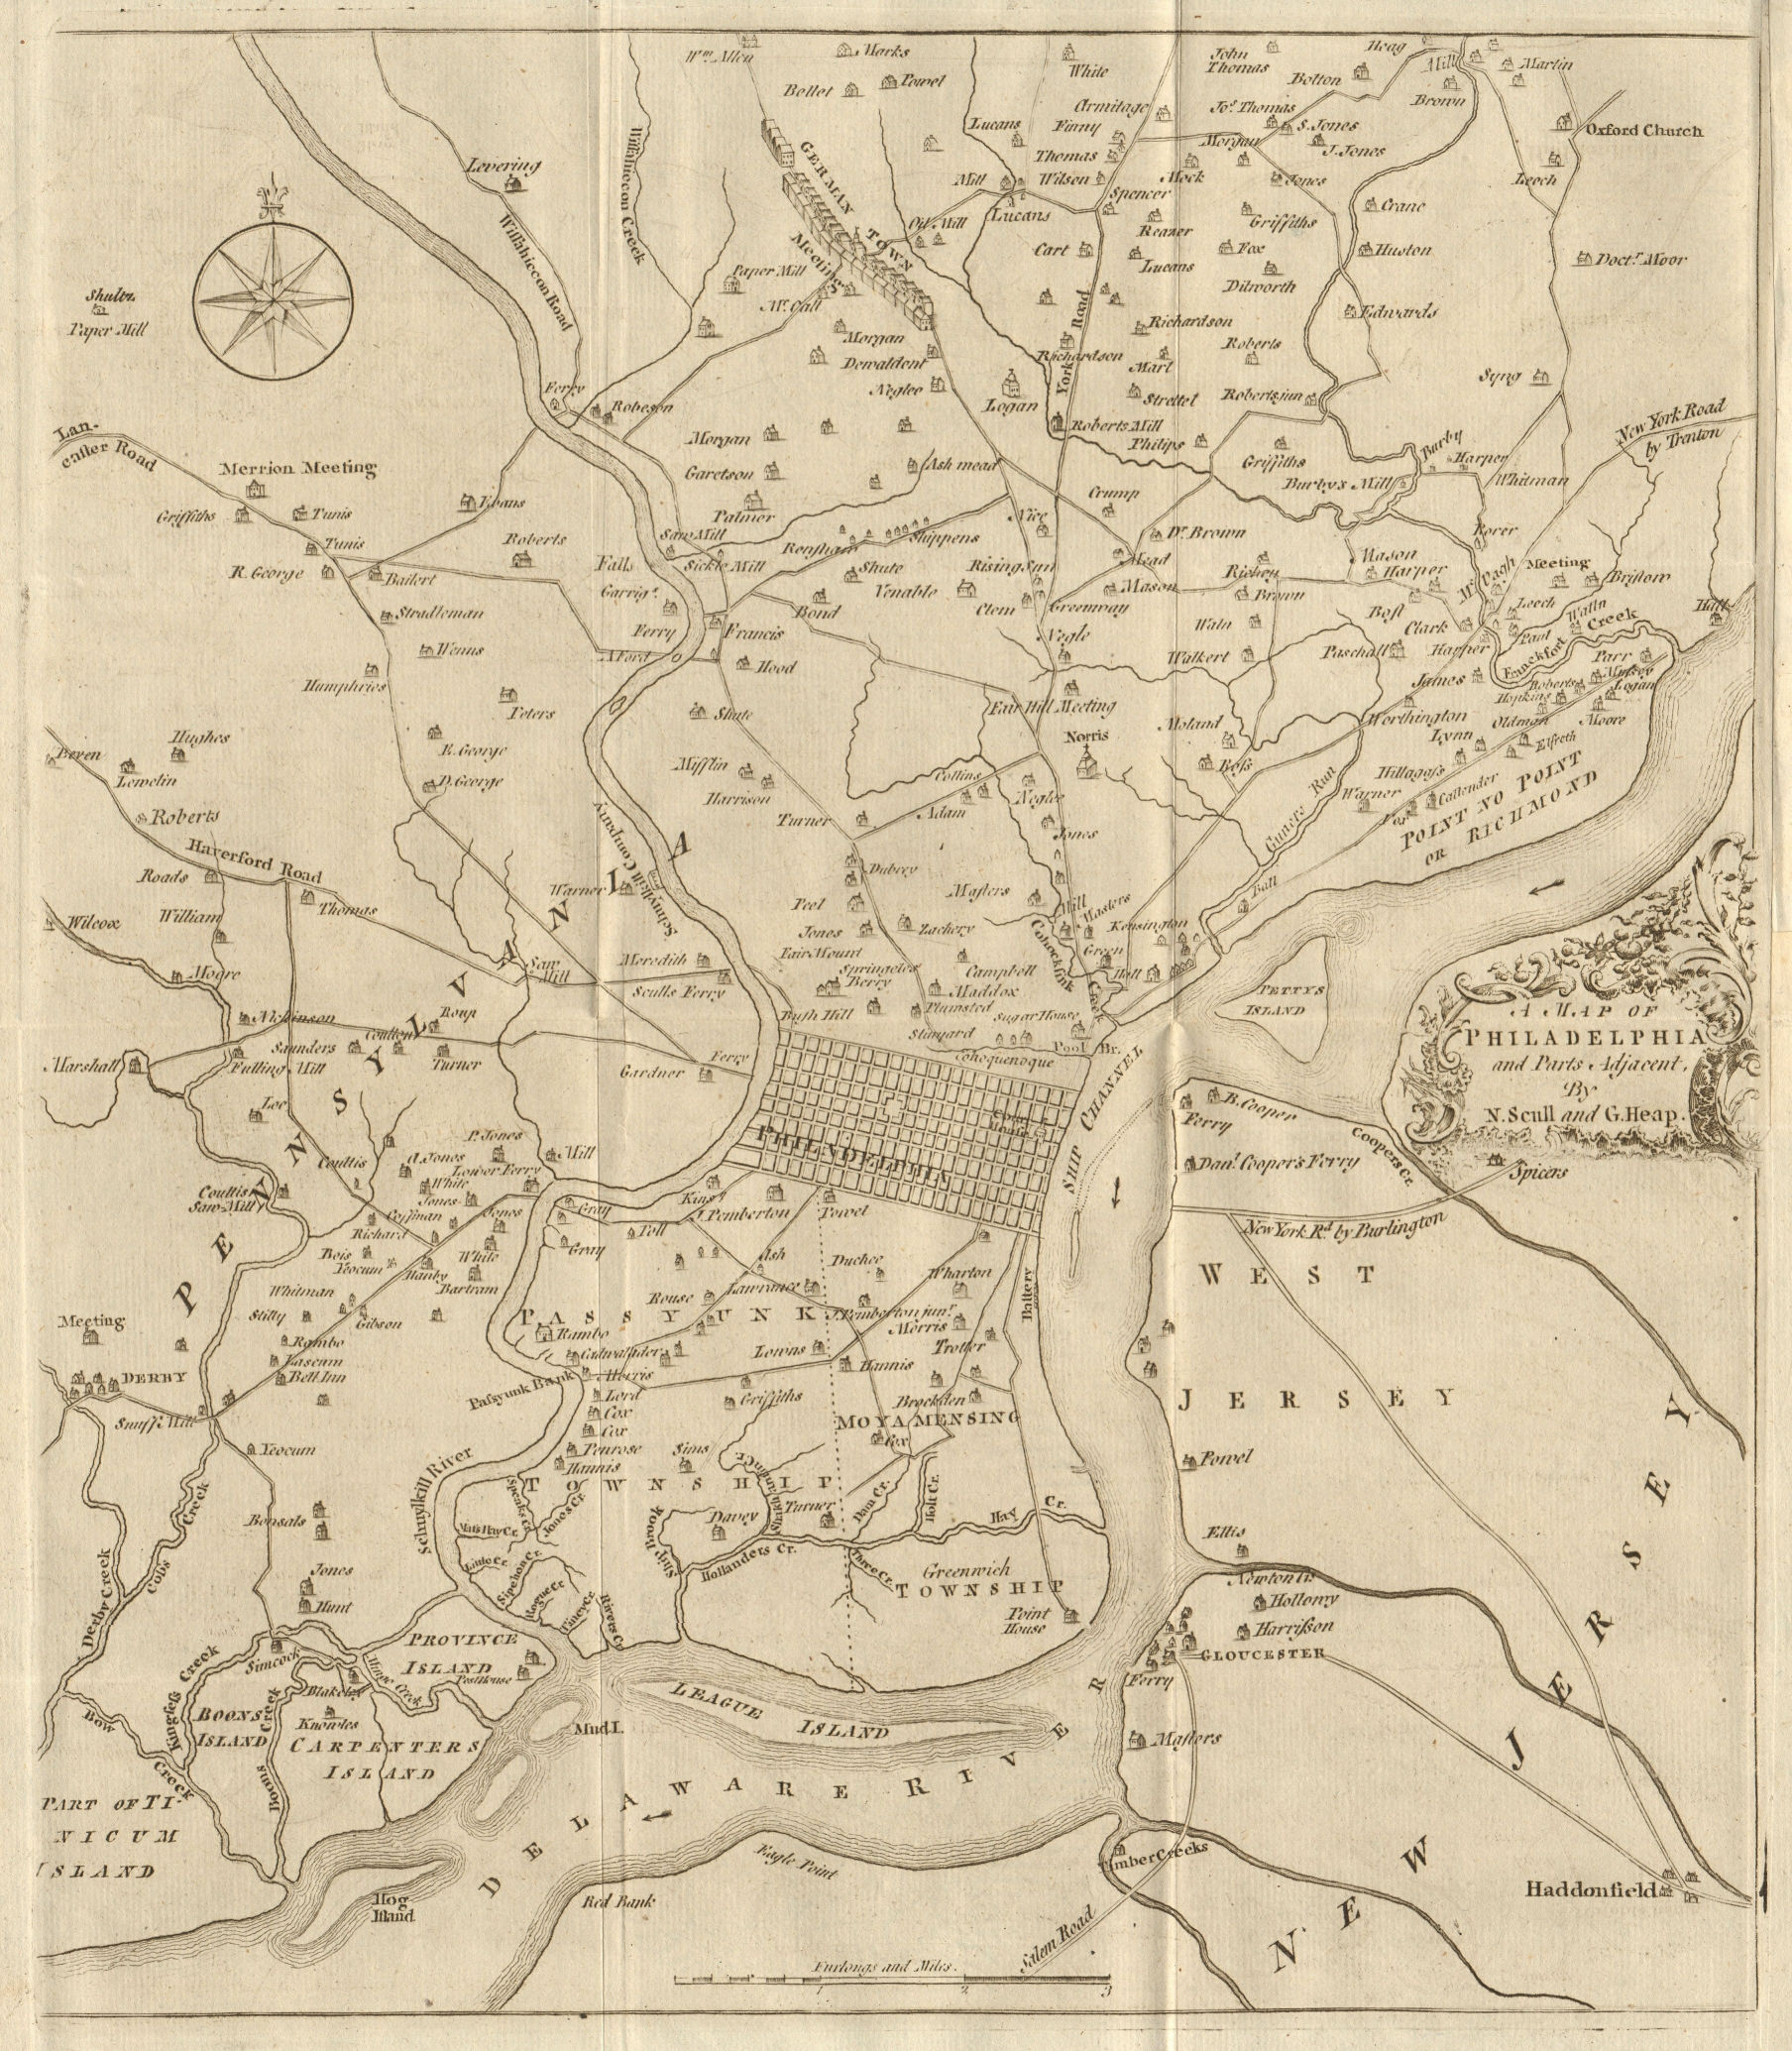 A map of Philadelphia and parts adjacent. Pennsylvania. SCULL & HEAP 1777